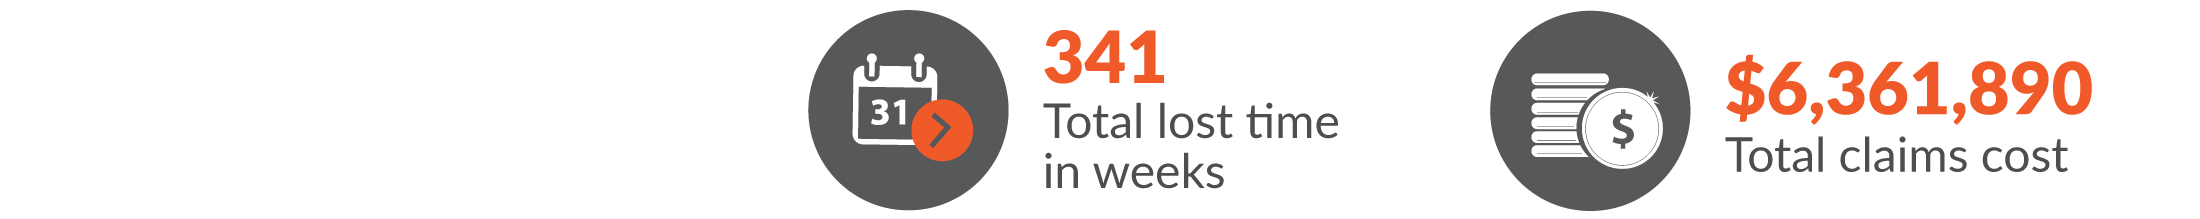 This infographic shows total workers compensation claims for Government Administration and Defence resulted in 253 total lost time in weeks and $4,009,345 was paid in benefits.